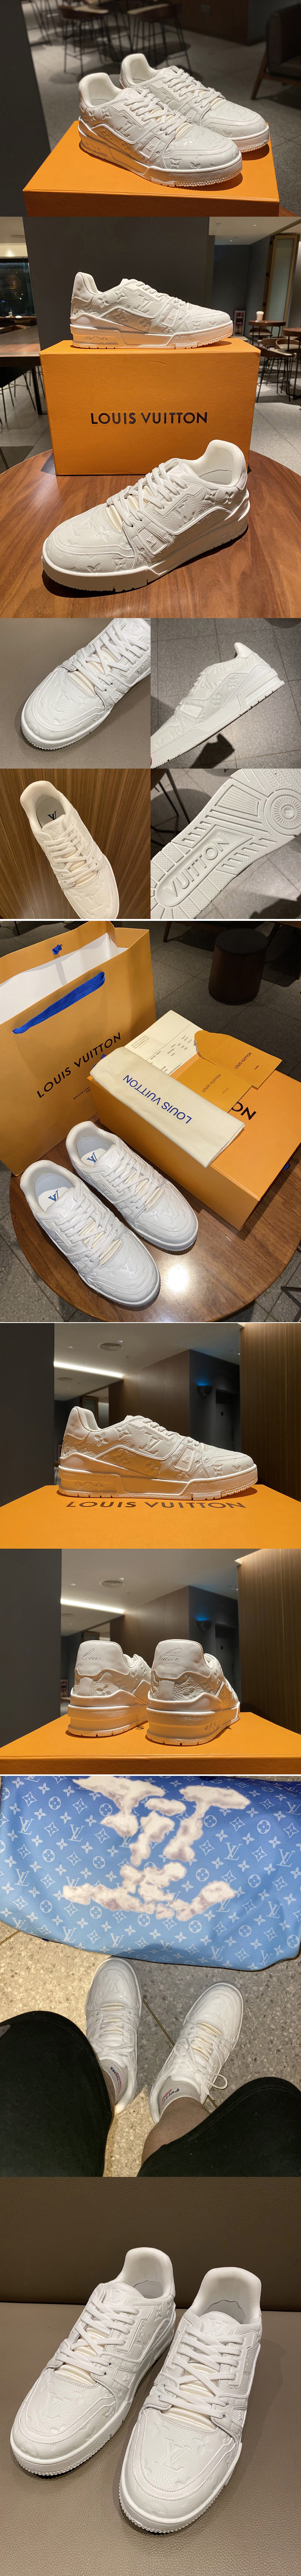 Replica Louis Vuitton 1A7WER LV Trainer sneaker in White Monogram-embossed grained calf leather